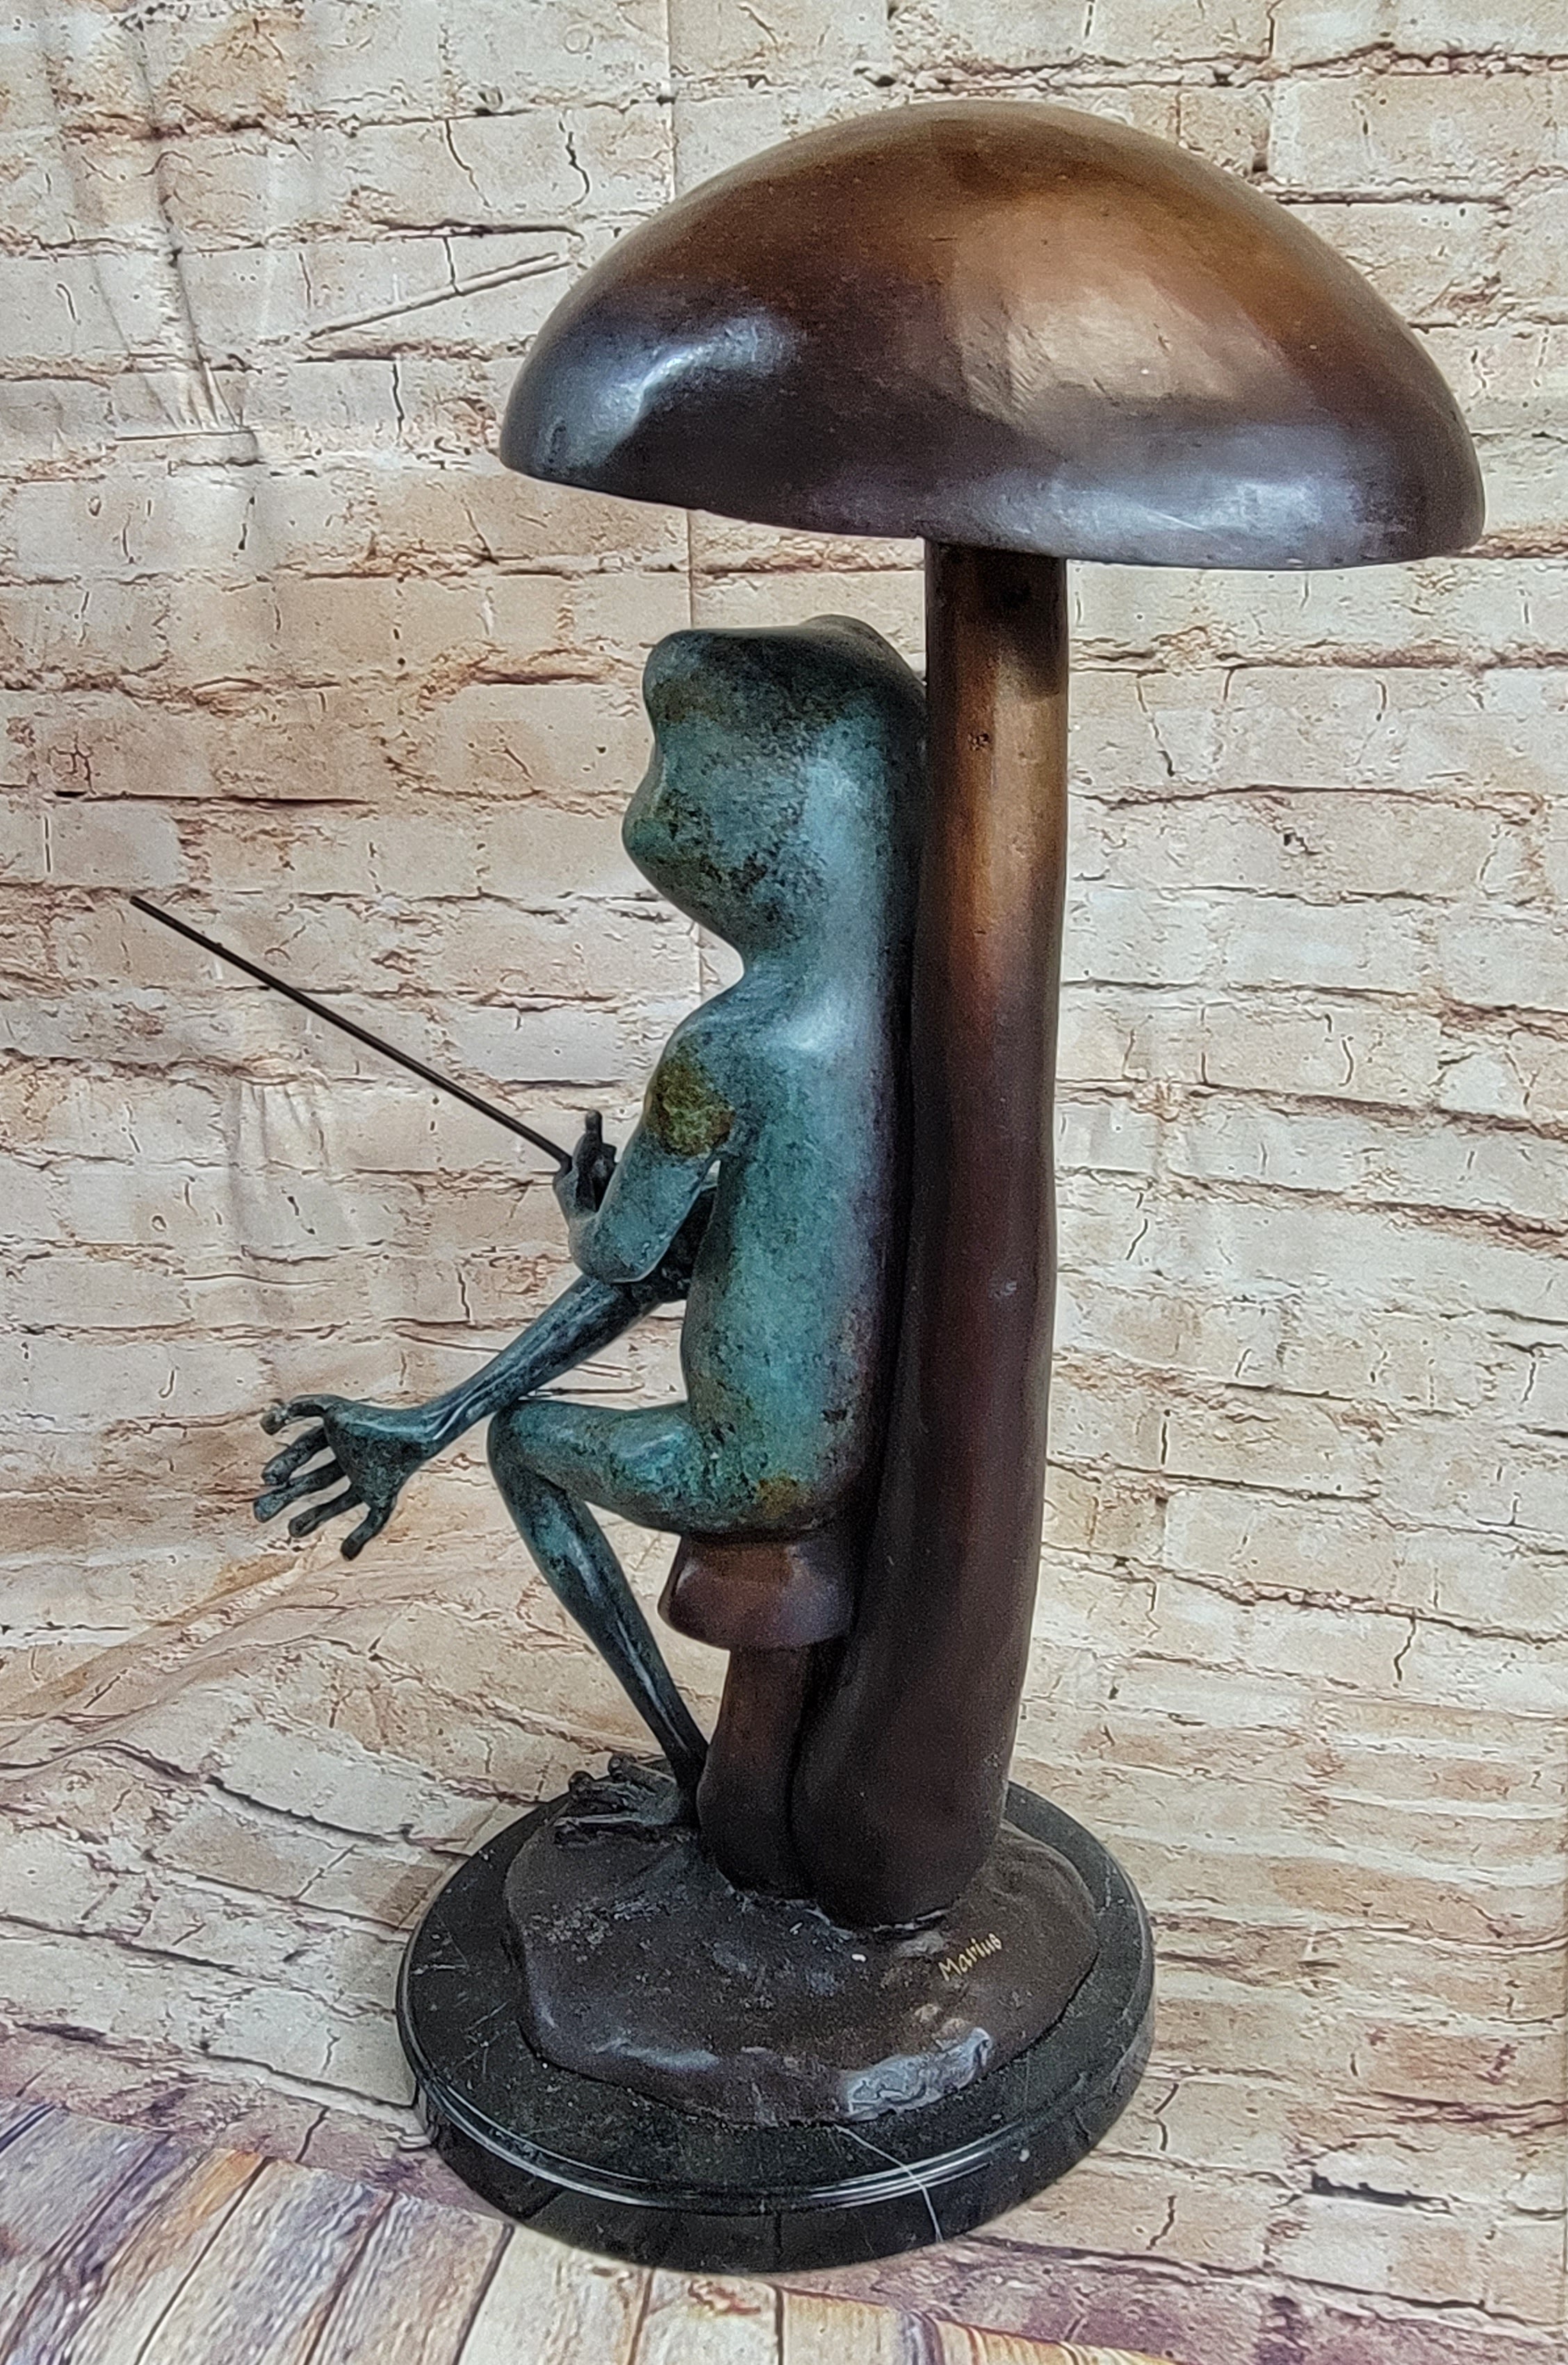 Bronze Sculpture Statue of a Frog Fishing Under a Mushroom Signed